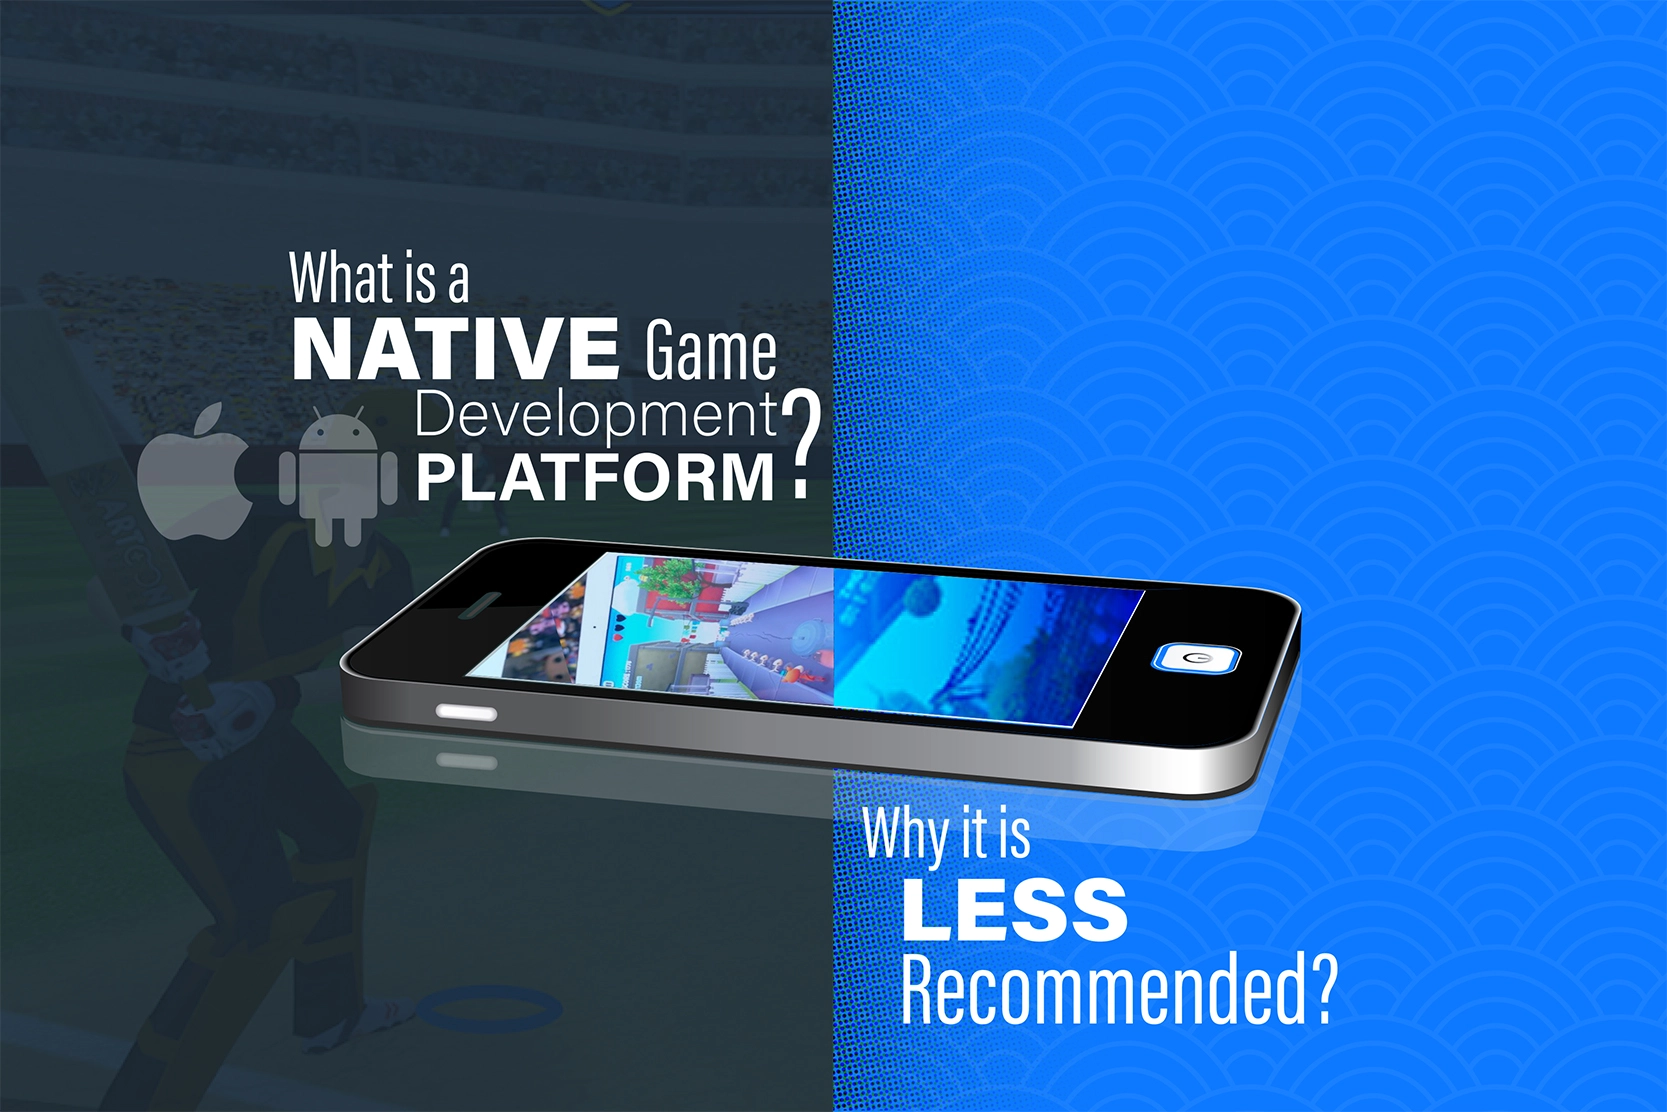 What is a Native Game Development Platform? Is it still recommended?